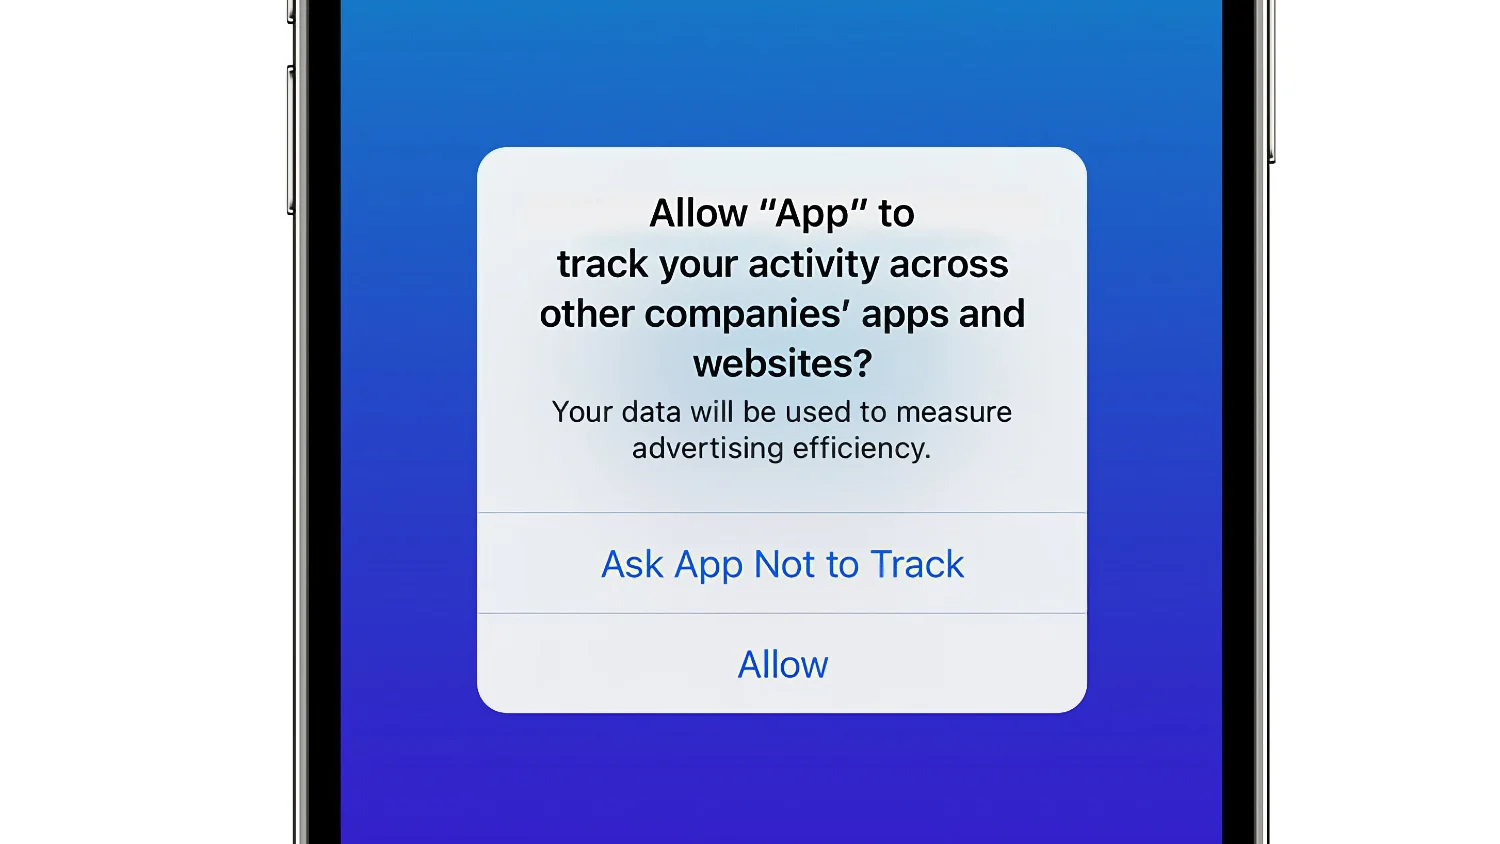 Popup on an iPhone screen, saying, “Allow ‘App’ to track your activity across other companies’ apps and websites?” The choices to respond are “Ask App Not to Track” and “Allow.